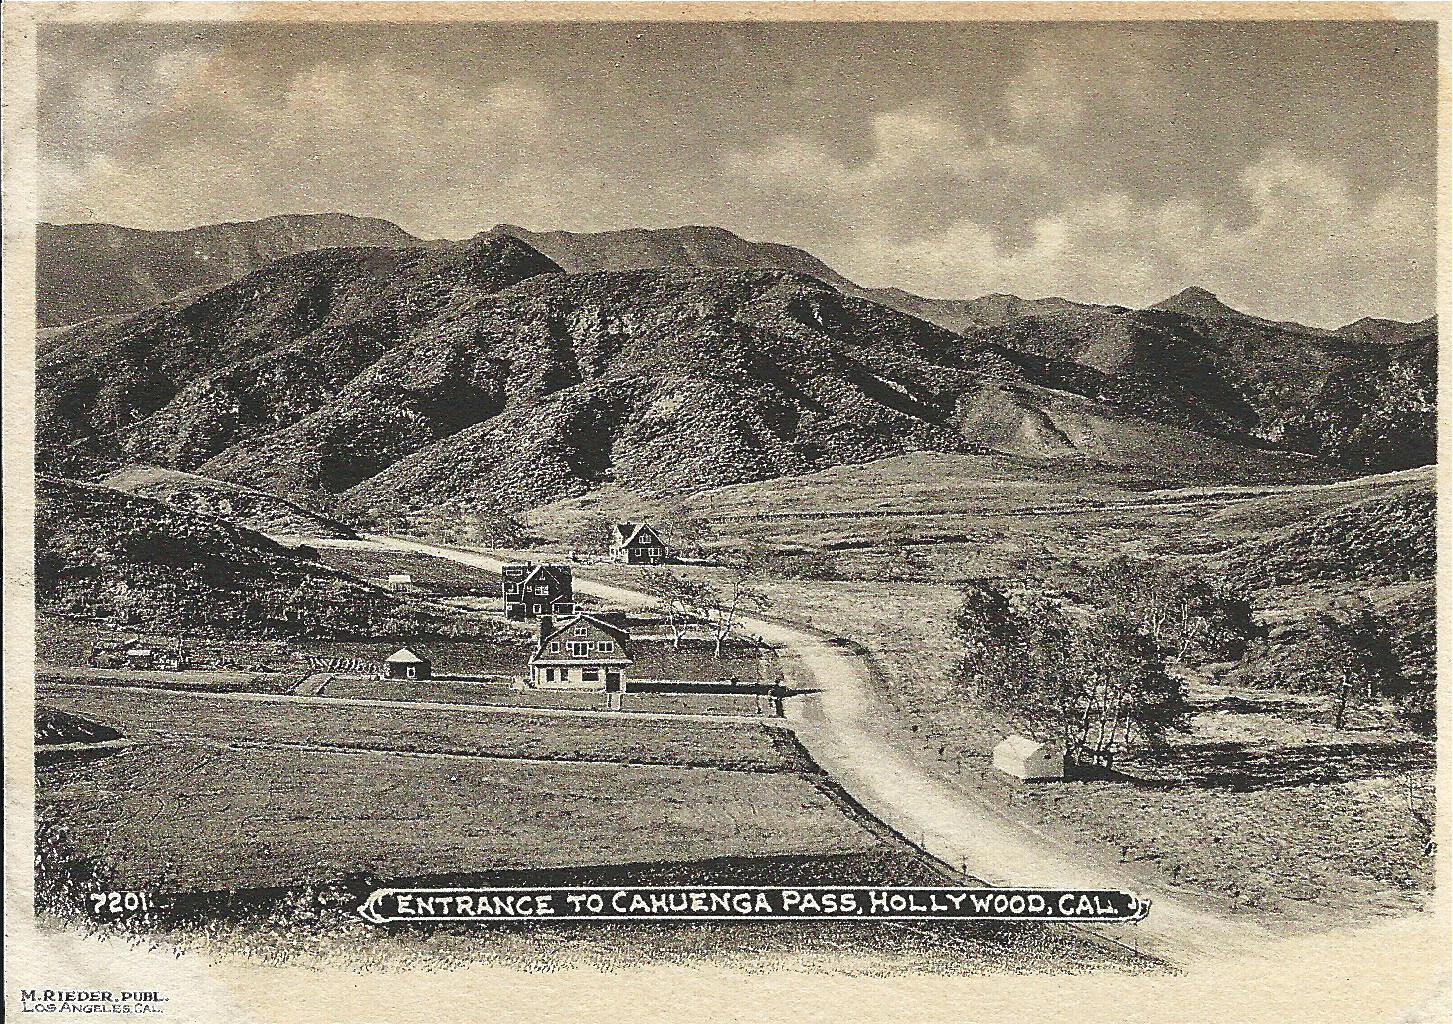 Entrance to the Cahuenga Pass from the south